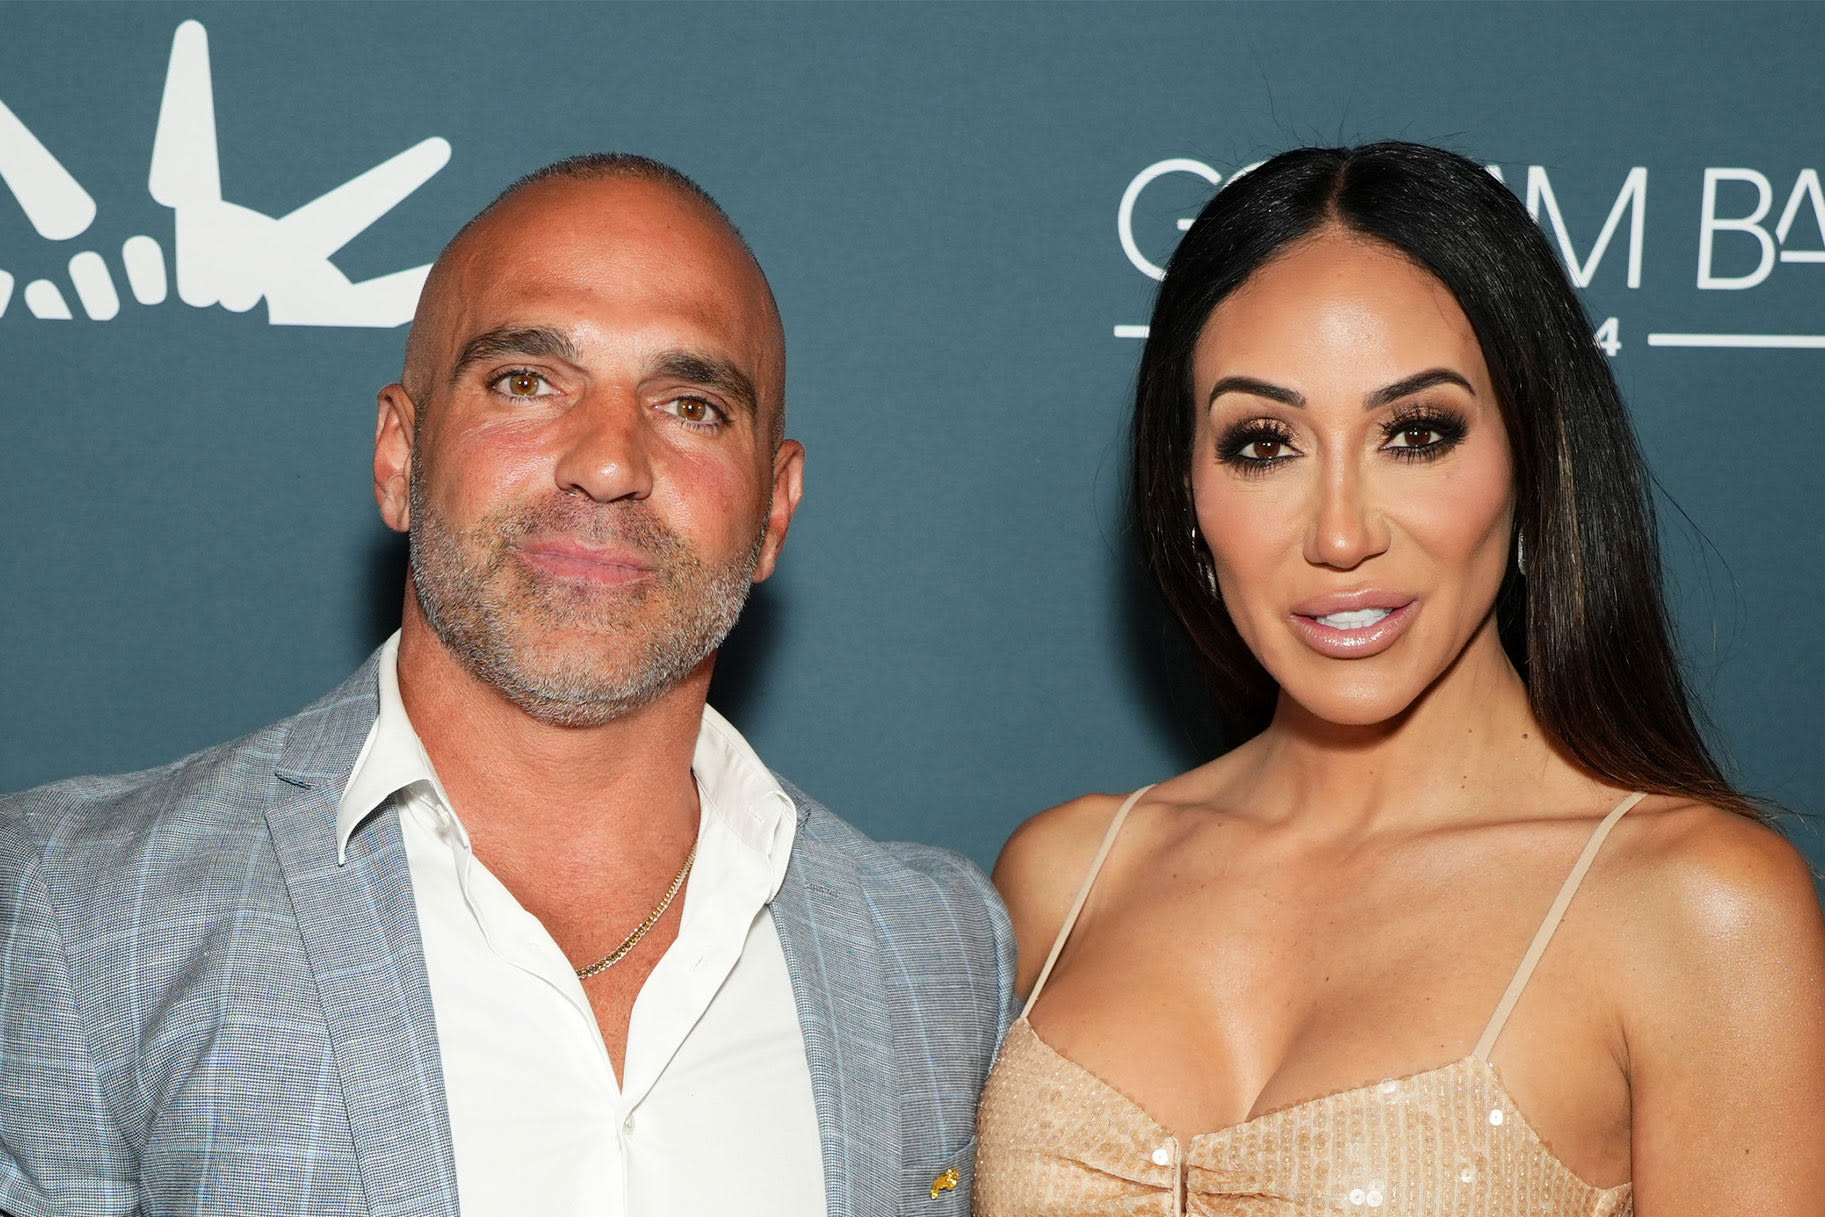 Joe Gorga says Melissa Is More "Jealous" Than He Is: "You Do Need Your Space..." | Bravo TV Official Site